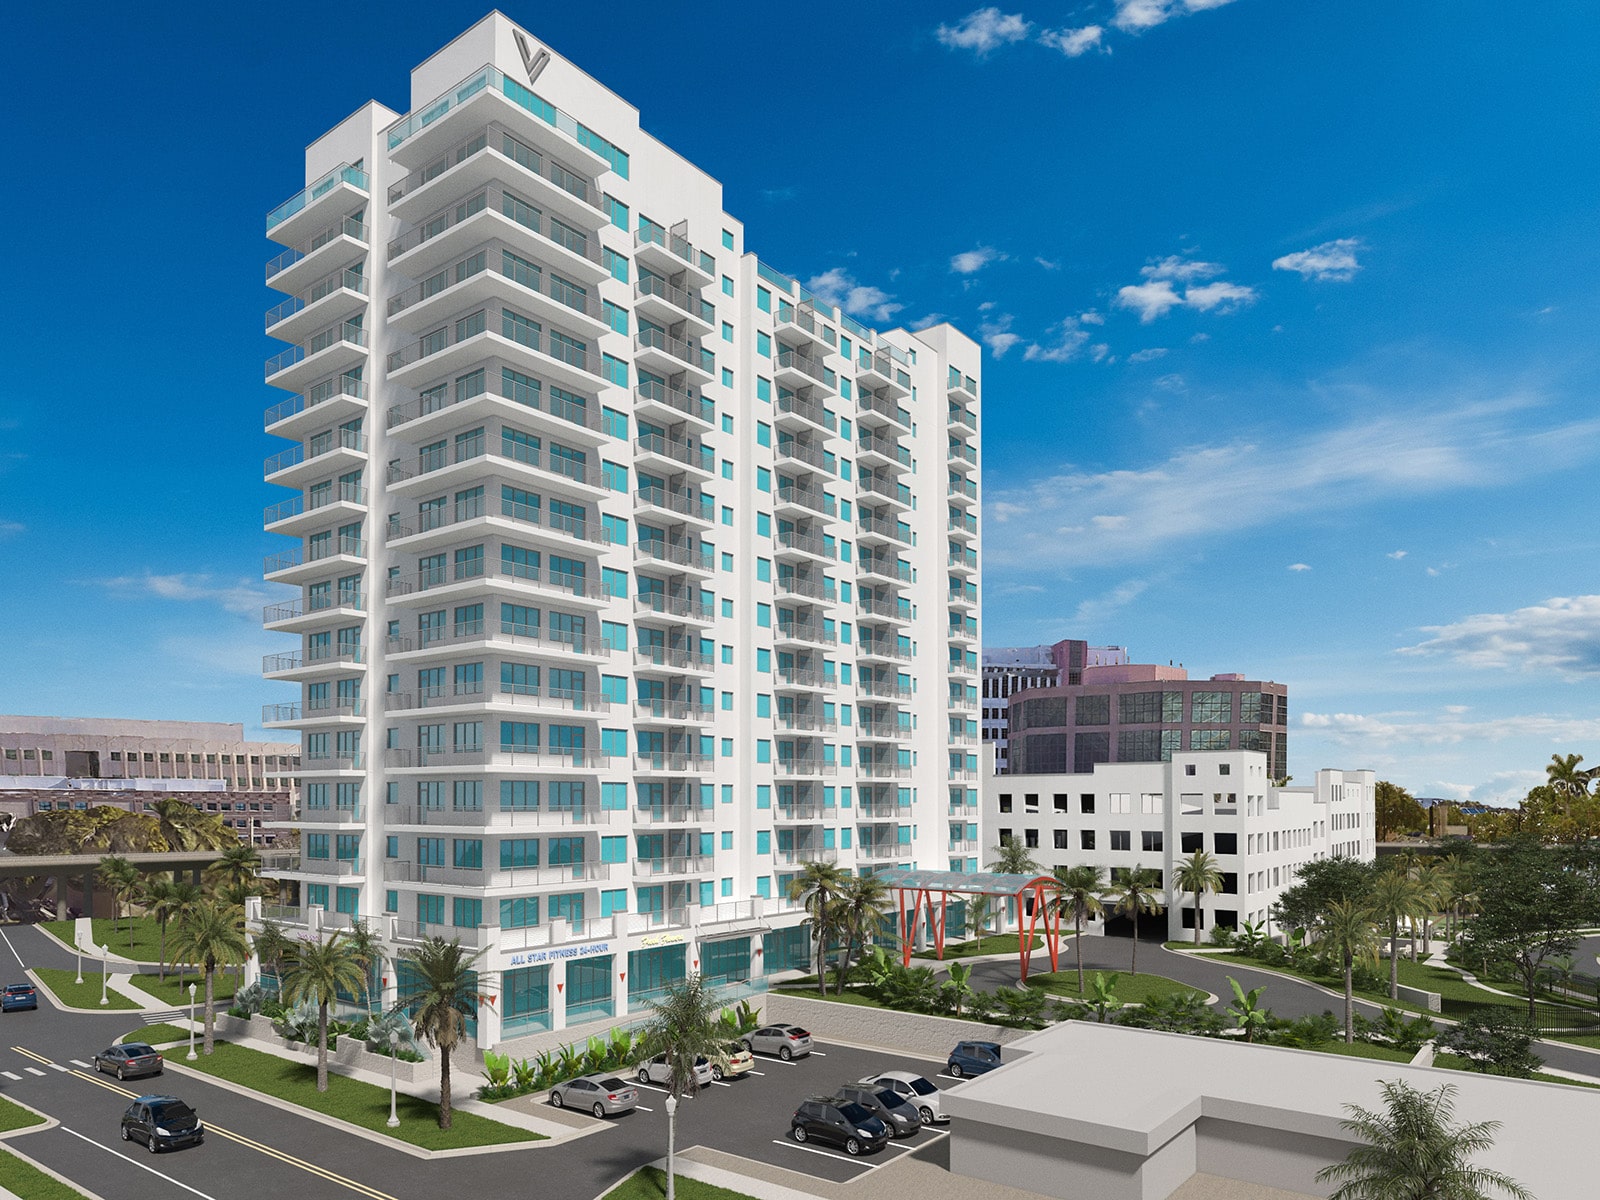 Exterior rendering of Vantage property in Fort Myers